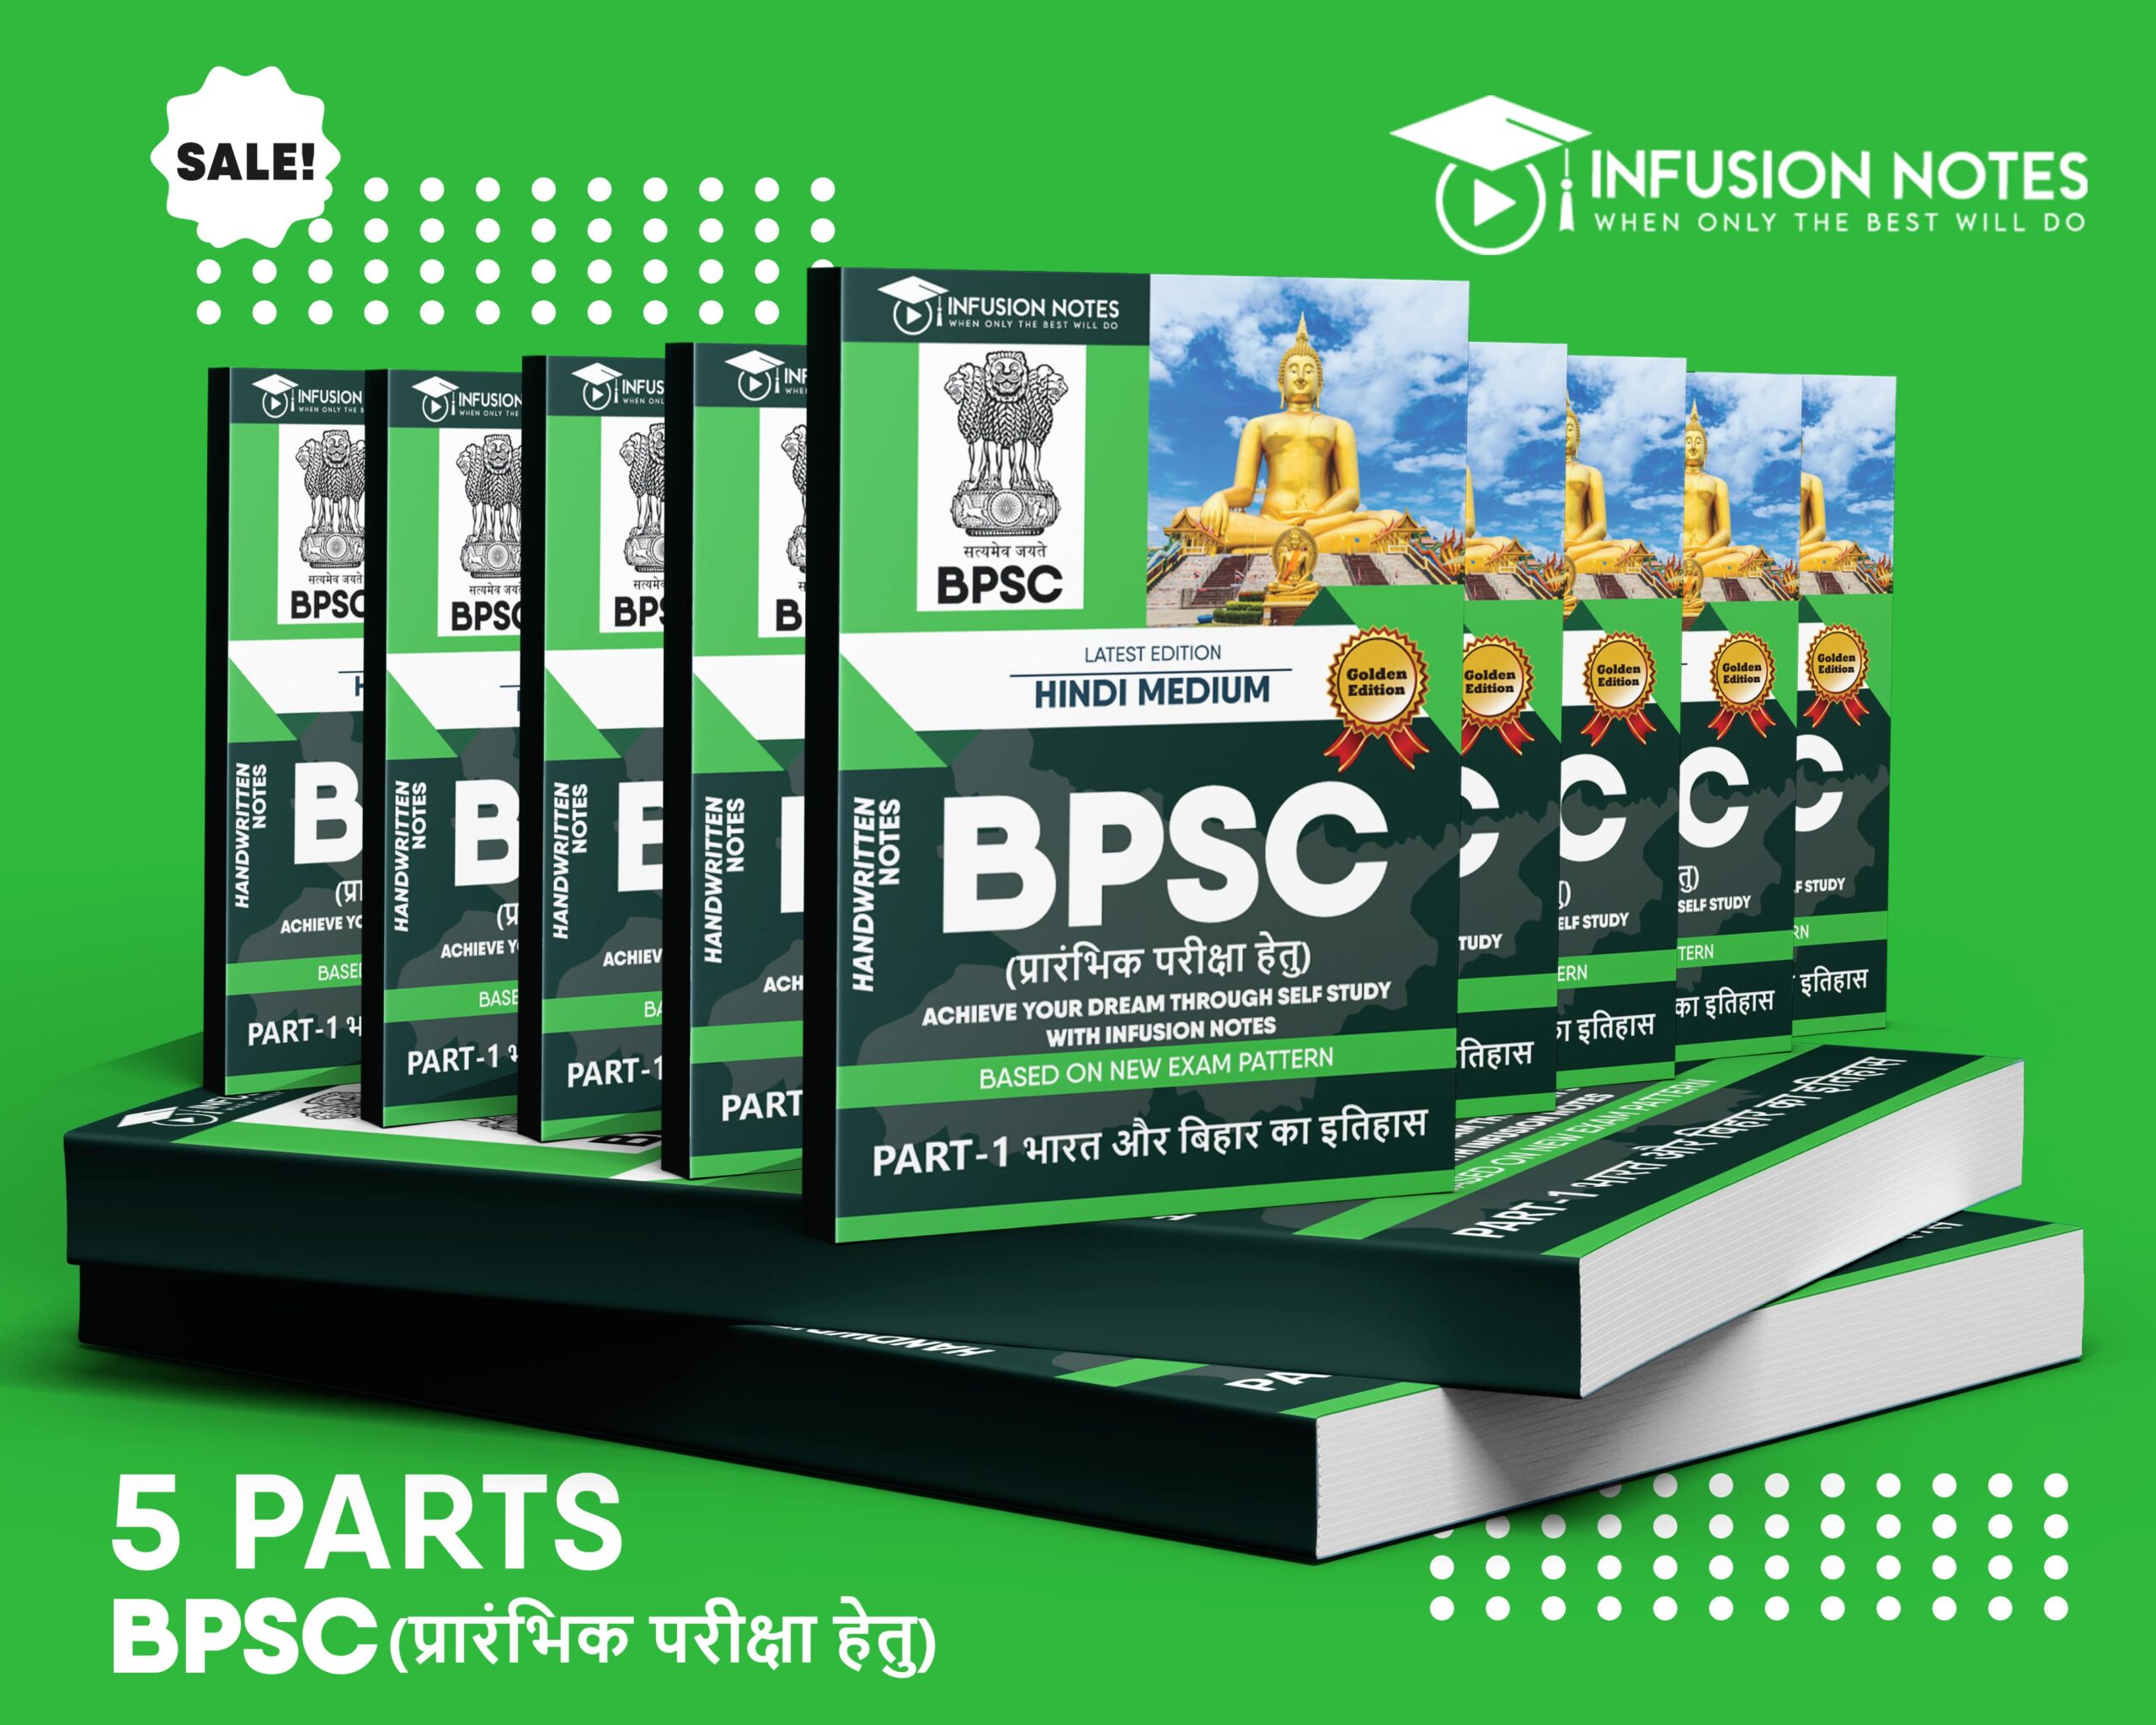 BPSC 3d Image